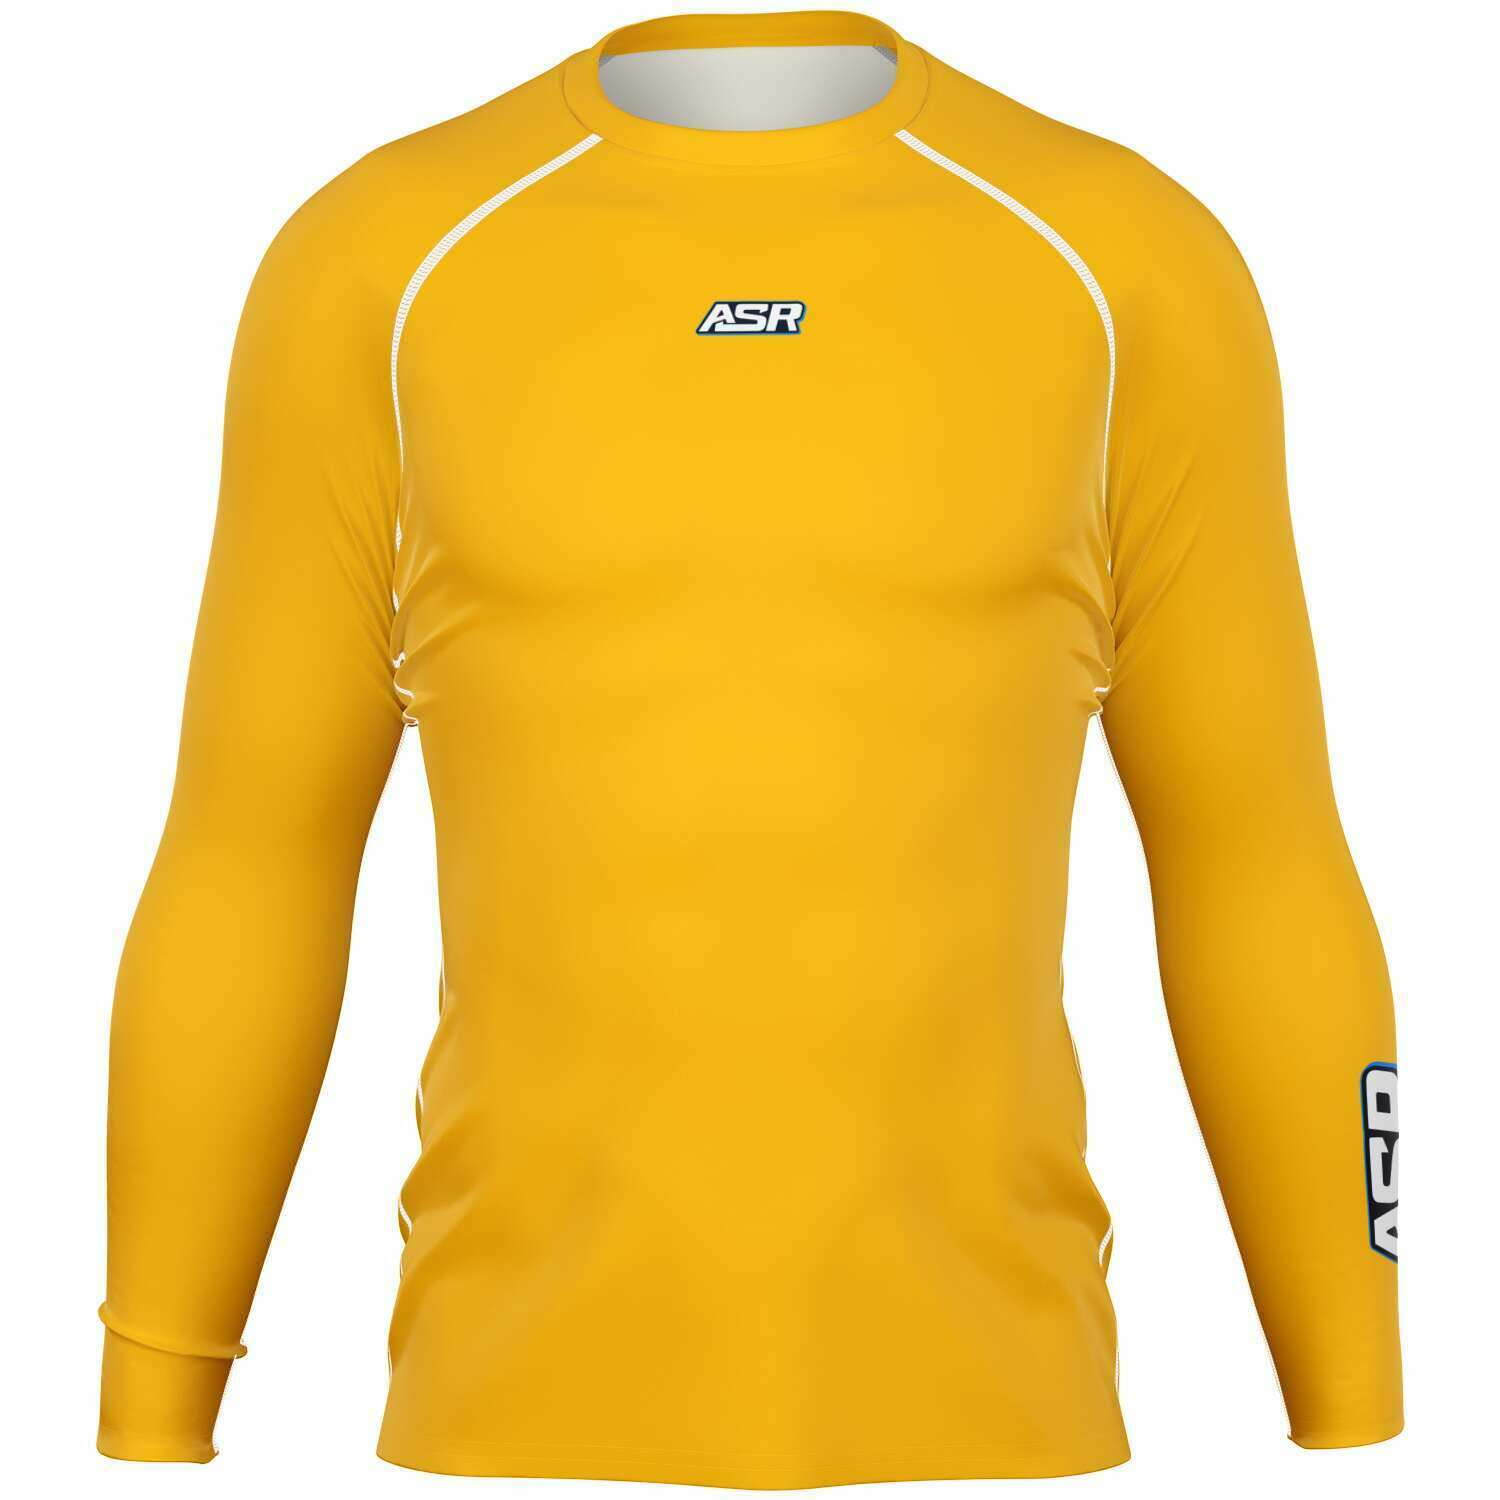 ASR Yellow Performance Compression Top